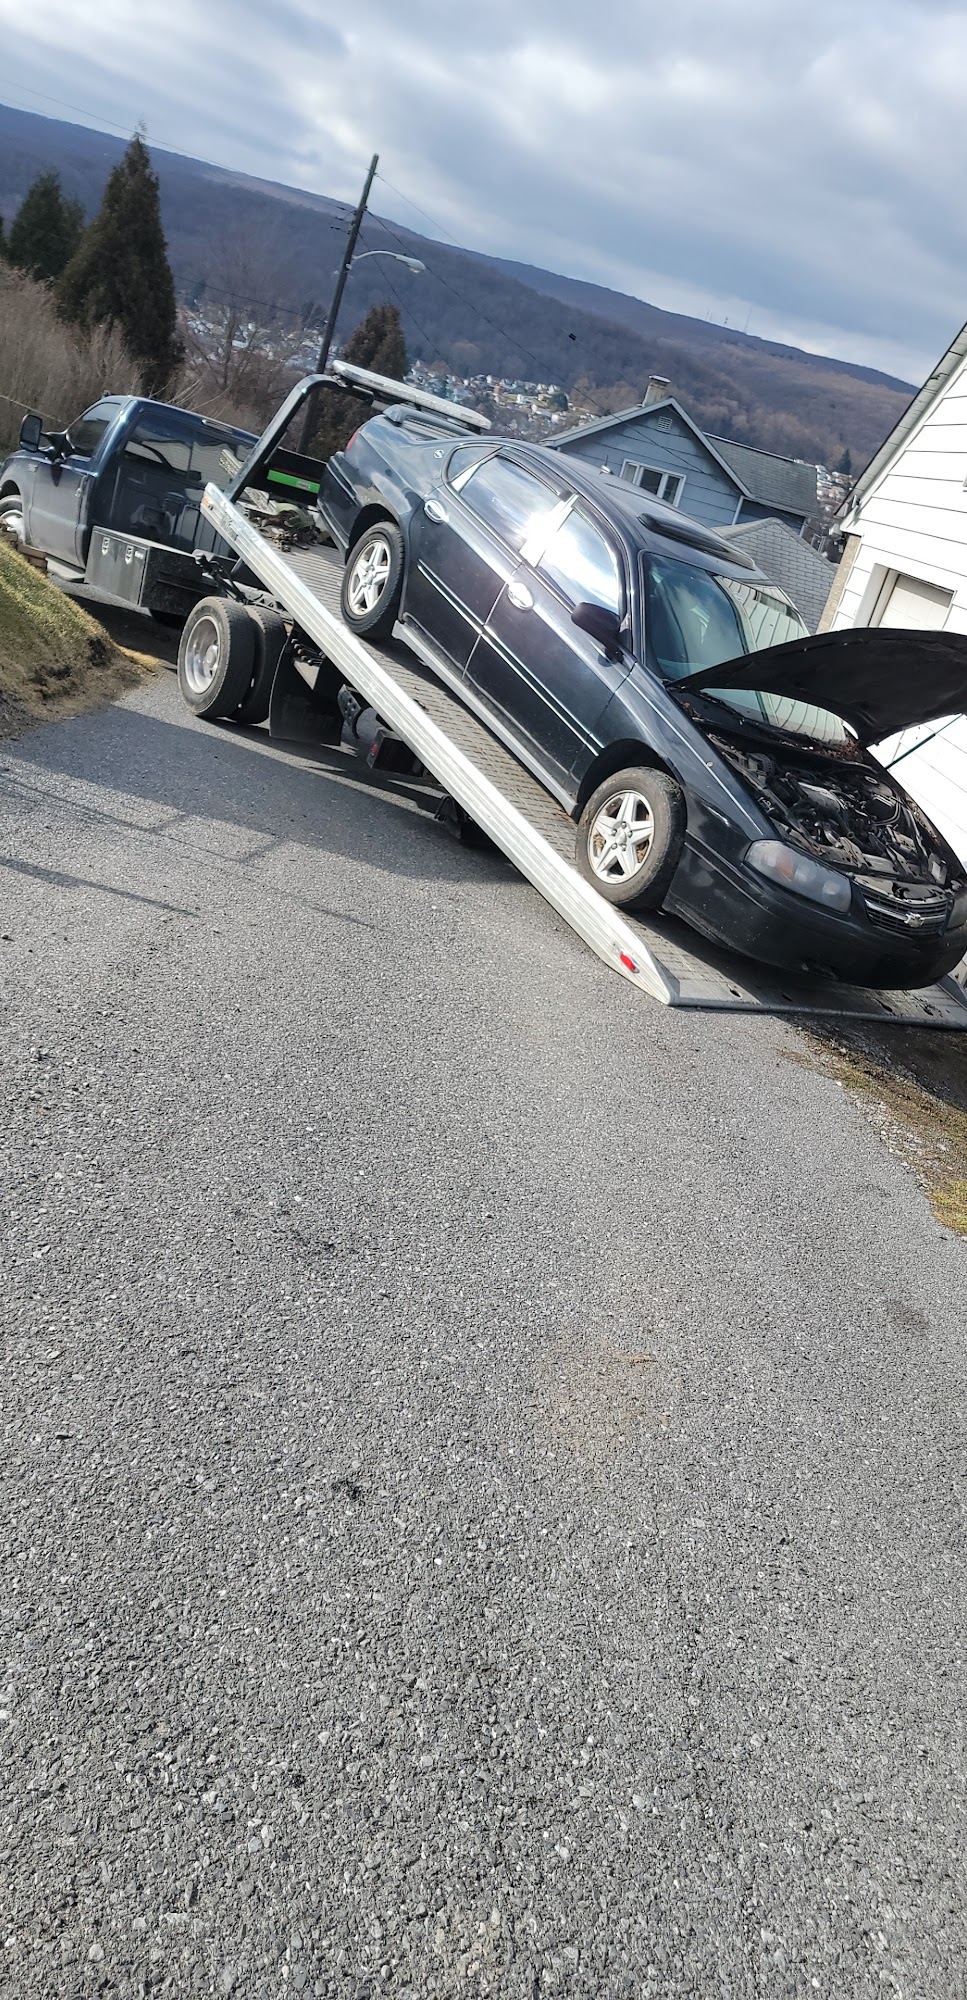 Chris's towing and recovery llc 163 Felgar Rd, Stahlstown Pennsylvania 15687